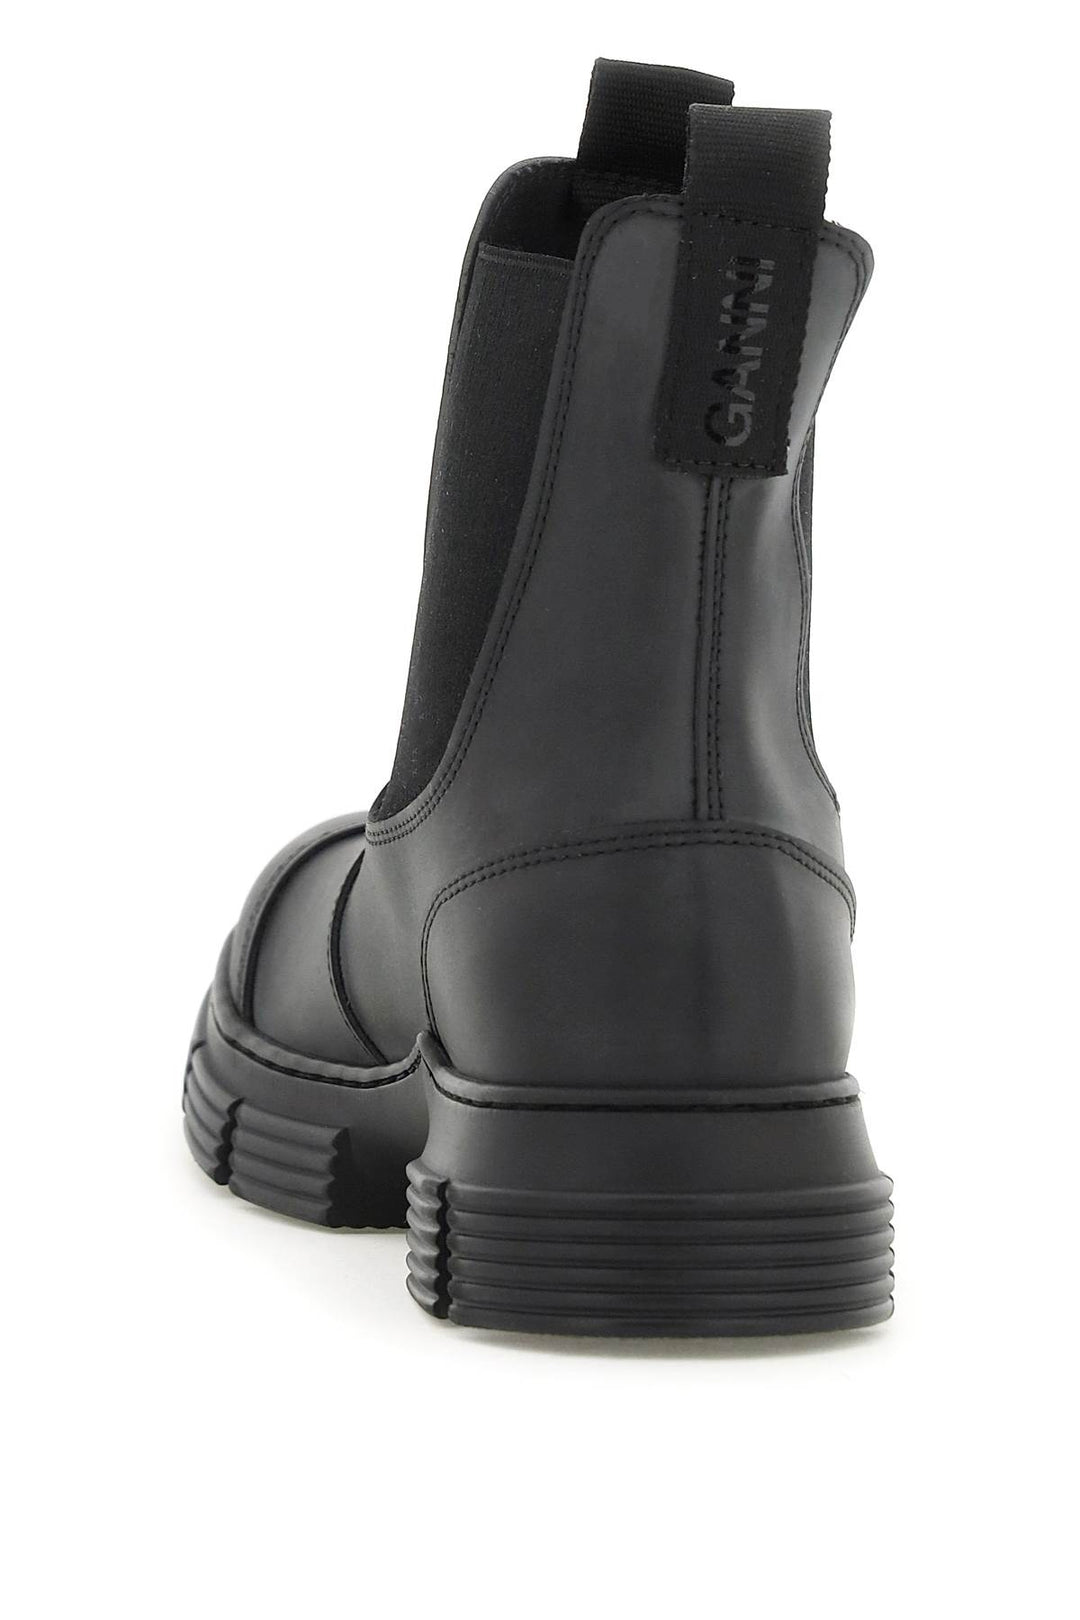 Ganni Recycled Rubber Chelsea Ankle Boots   Nero